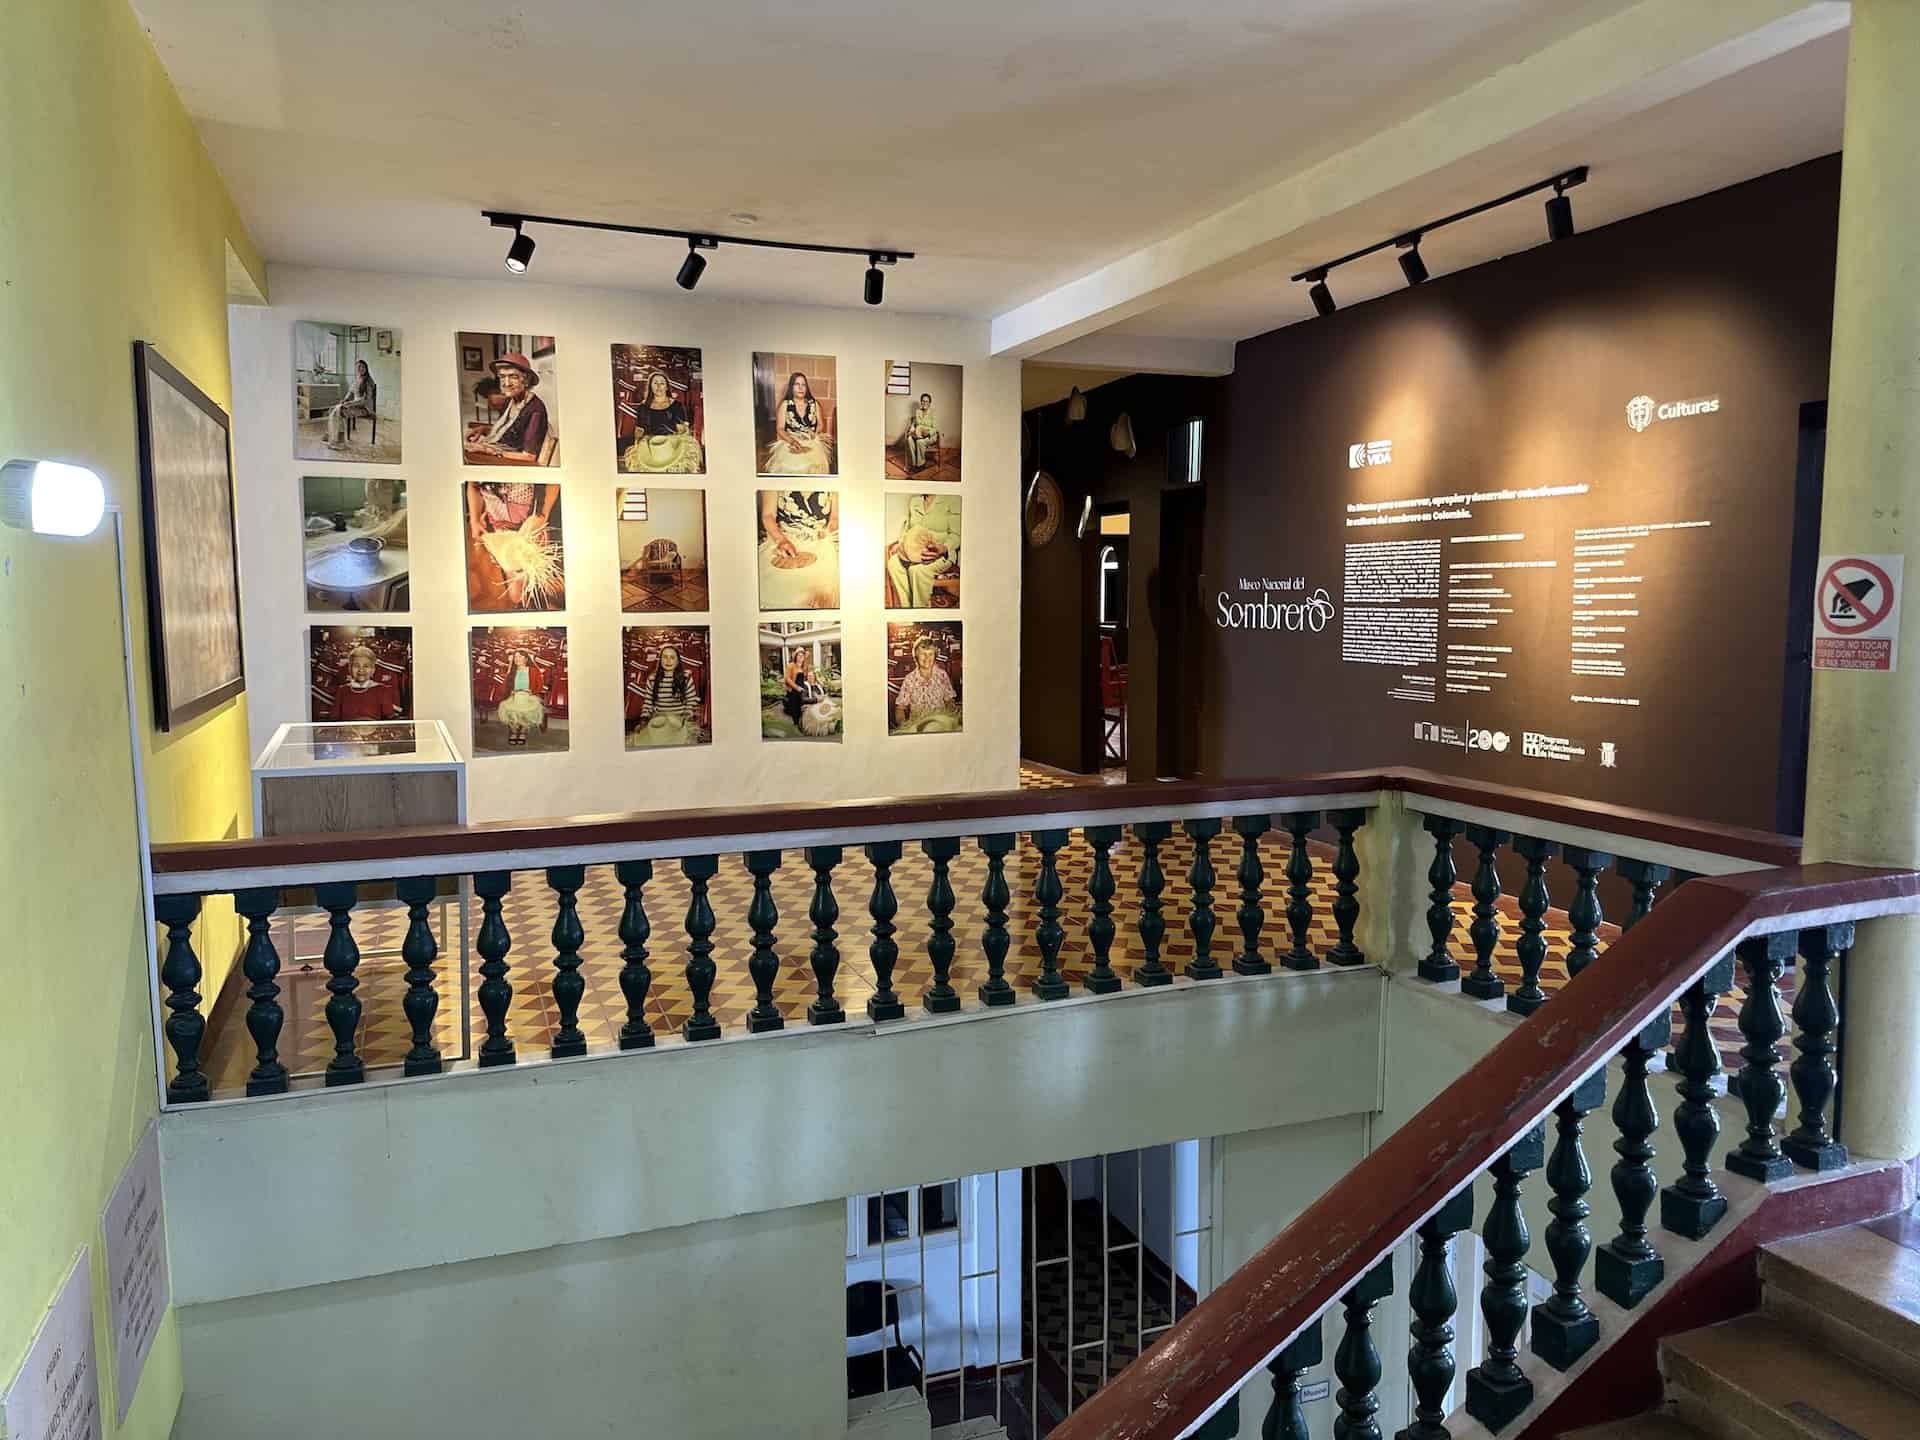 National Museum of Hats at the Francisco Giraldo Cultural Center in Aguadas, Caldas, Colombia